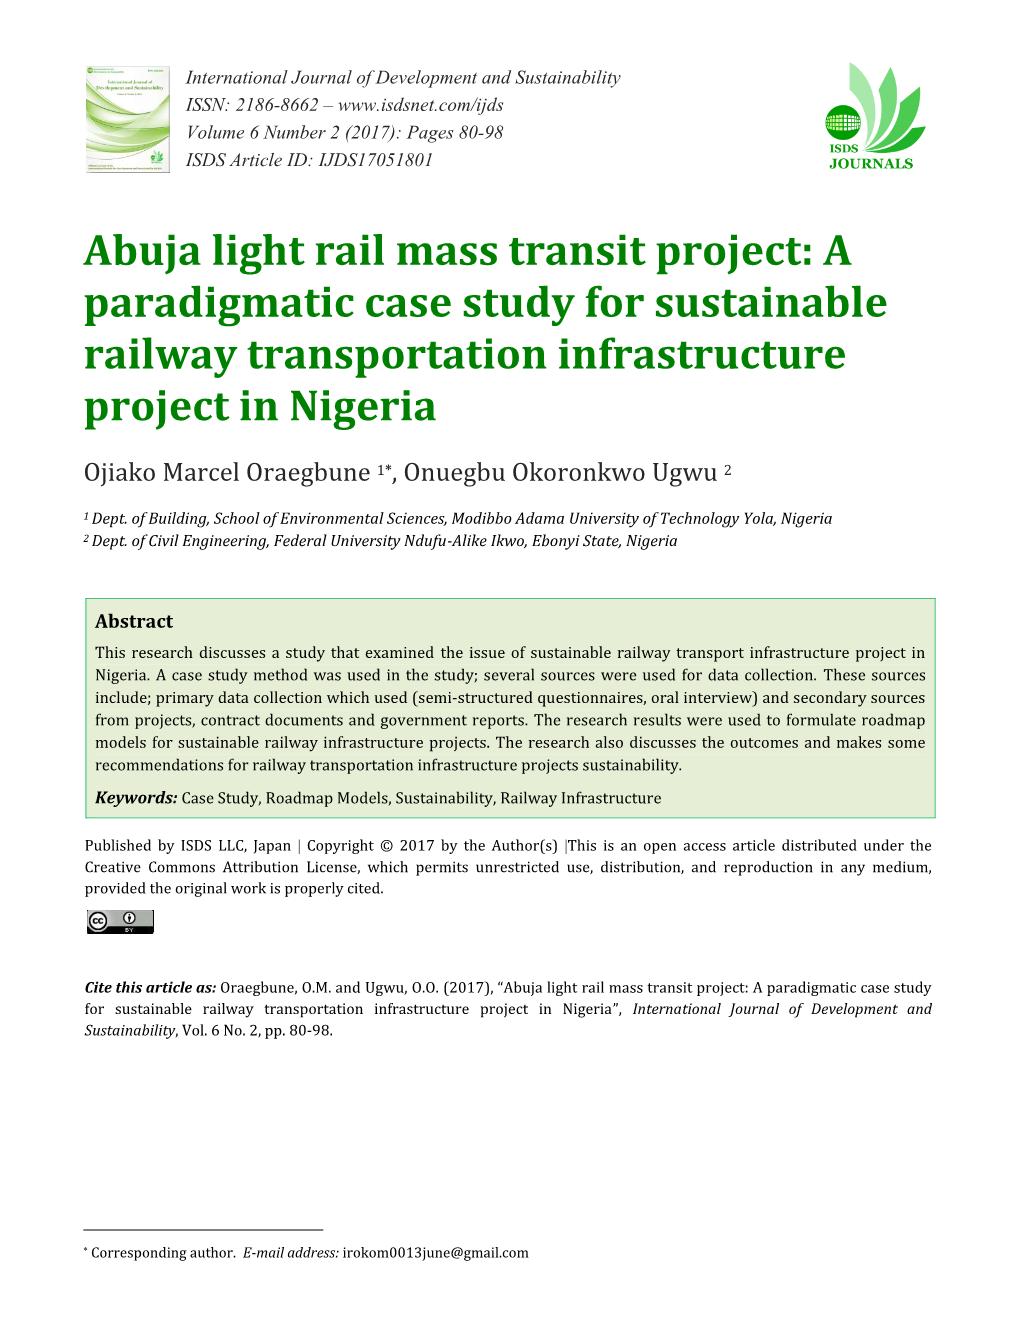 Abuja Light Rail Mass Transit Project: a Paradigmatic Case Study for Sustainable Railway Transportation Infrastructure Project in Nigeria